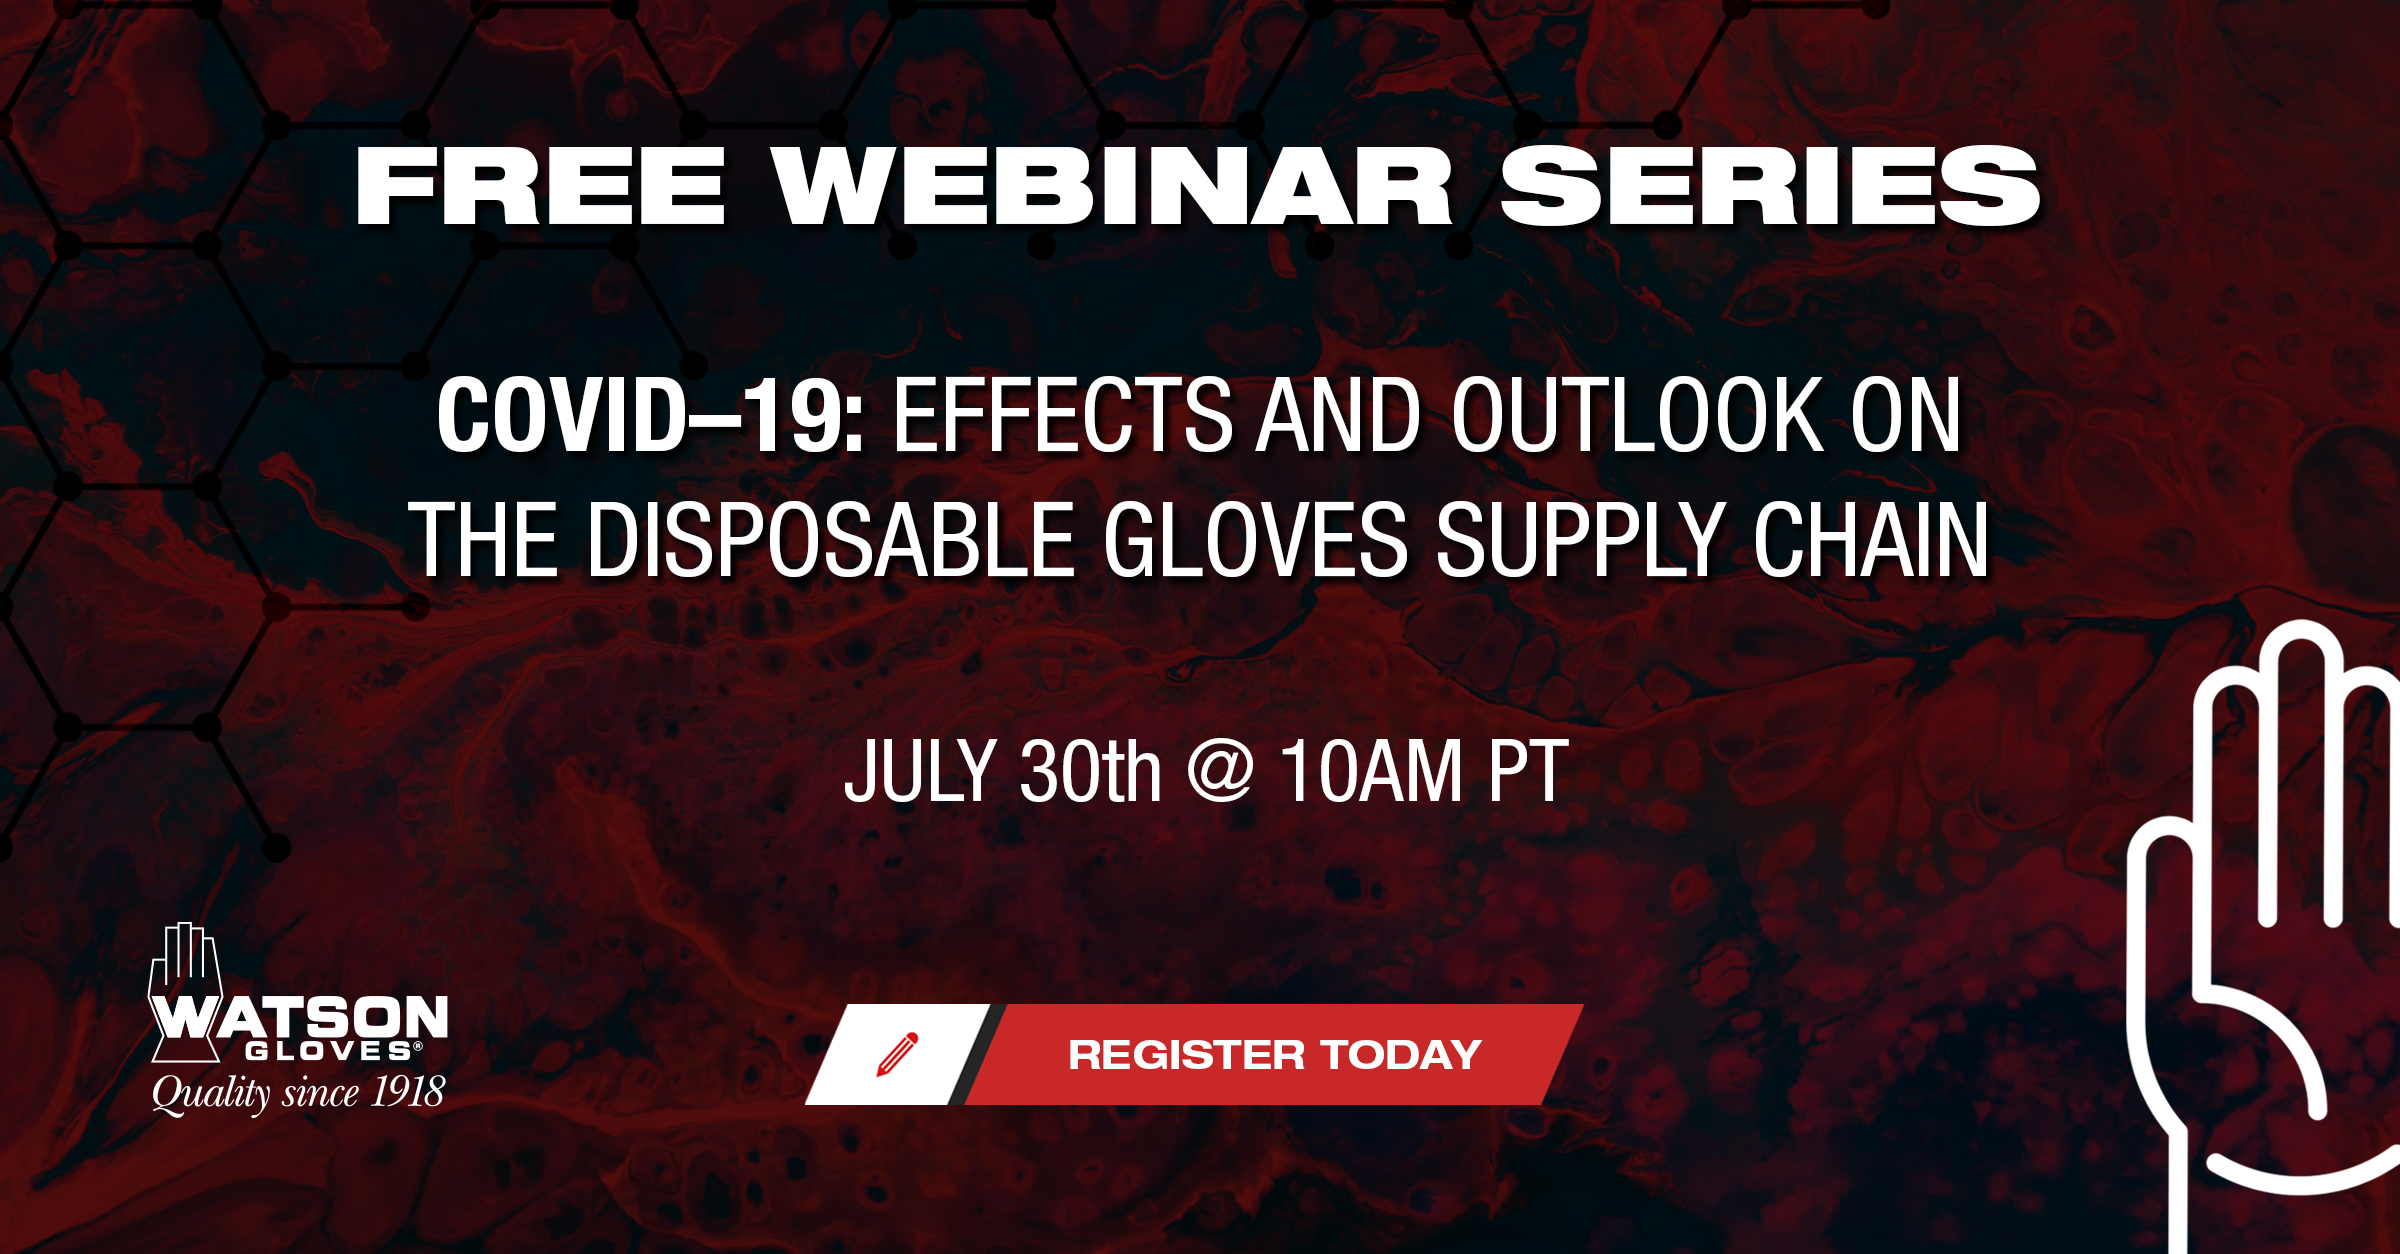 Covid-19: Effects and Outlook on the Disposable Gloves Supply Chain Webinar Banner